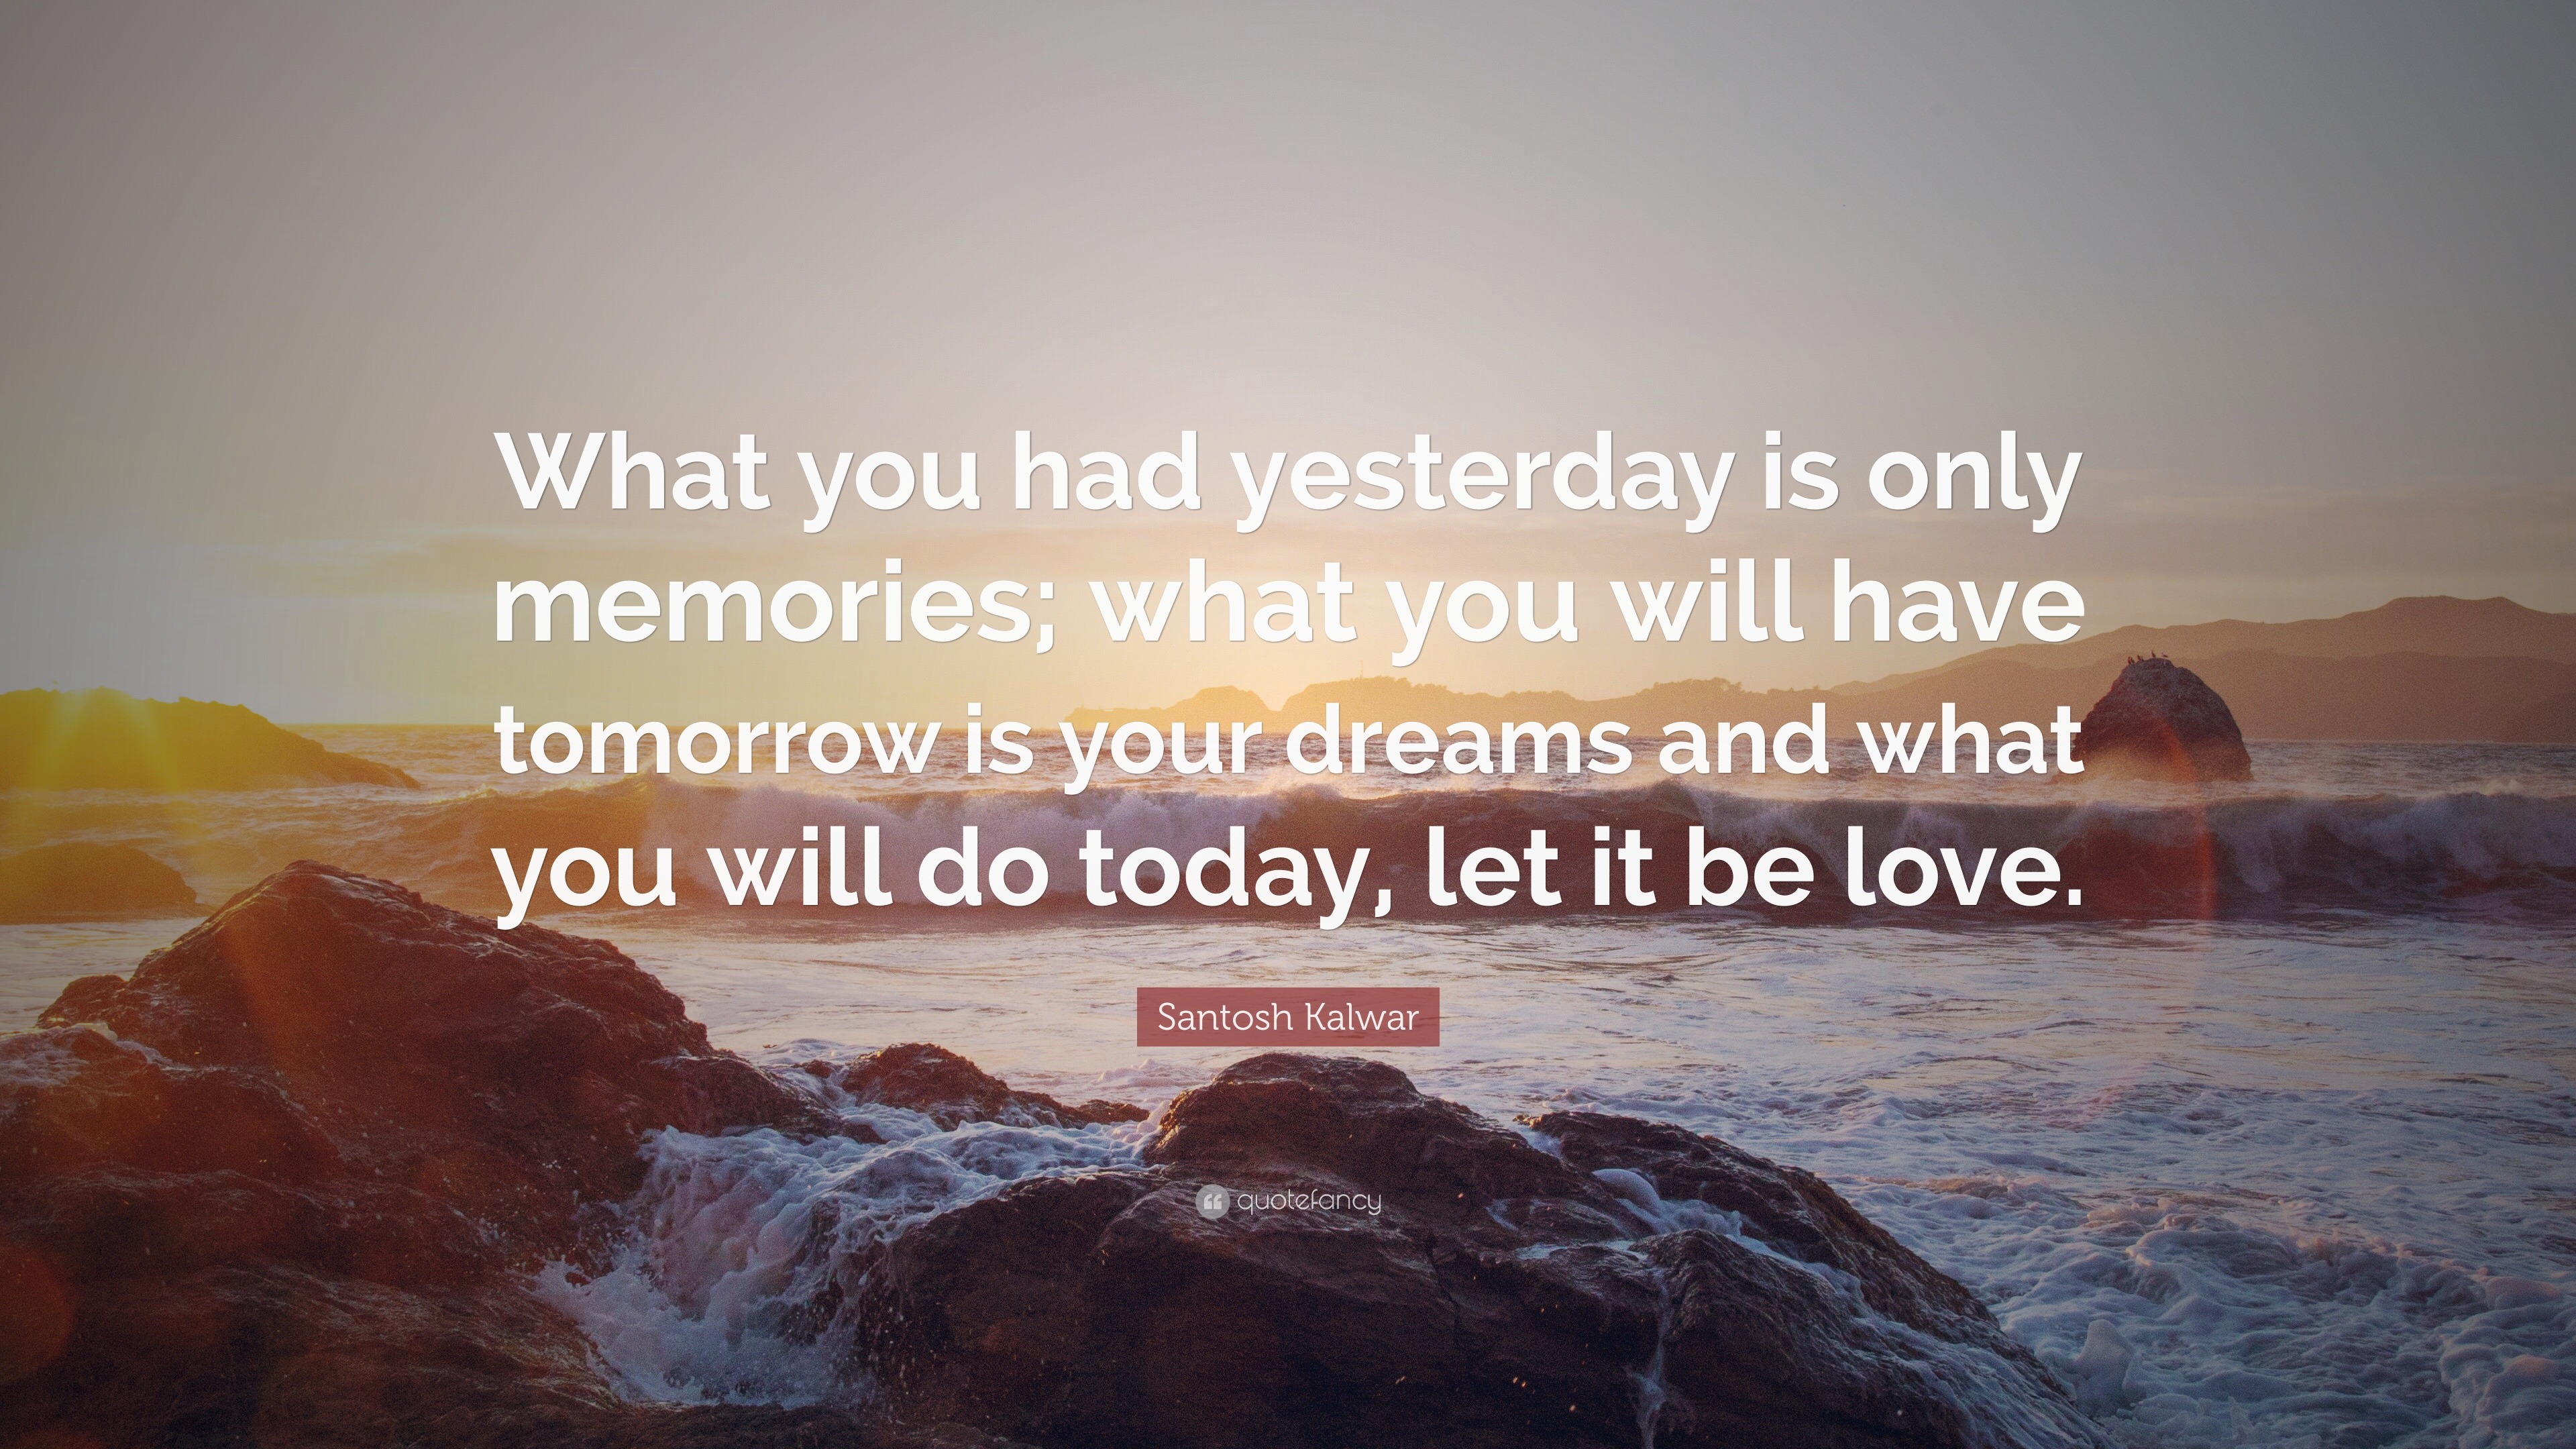 Santosh Kalwar Quote: “What you had yesterday is only memories; what ...